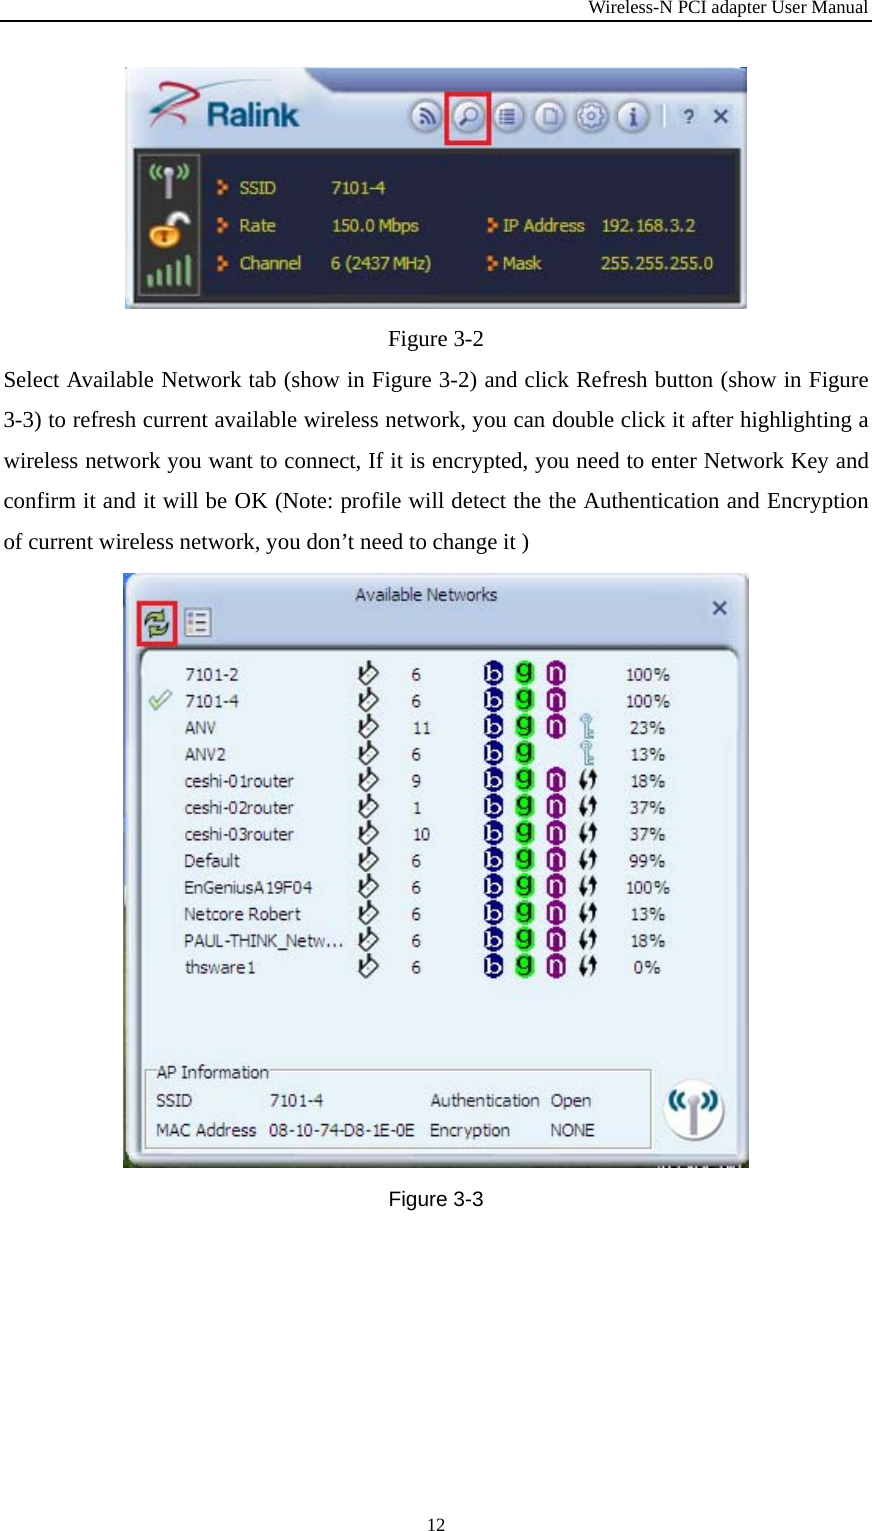 Wireless-N PCI adapter User Manual 12  Figure 3-2 Select Available Network tab (show in Figure 3-2) and click Refresh button (show in Figure 3-3) to refresh current available wireless network, you can double click it after highlighting a wireless network you want to connect, If it is encrypted, you need to enter Network Key and confirm it and it will be OK (Note: profile will detect the the Authentication and Encryption of current wireless network, you don’t need to change it ) Figure 3-3  